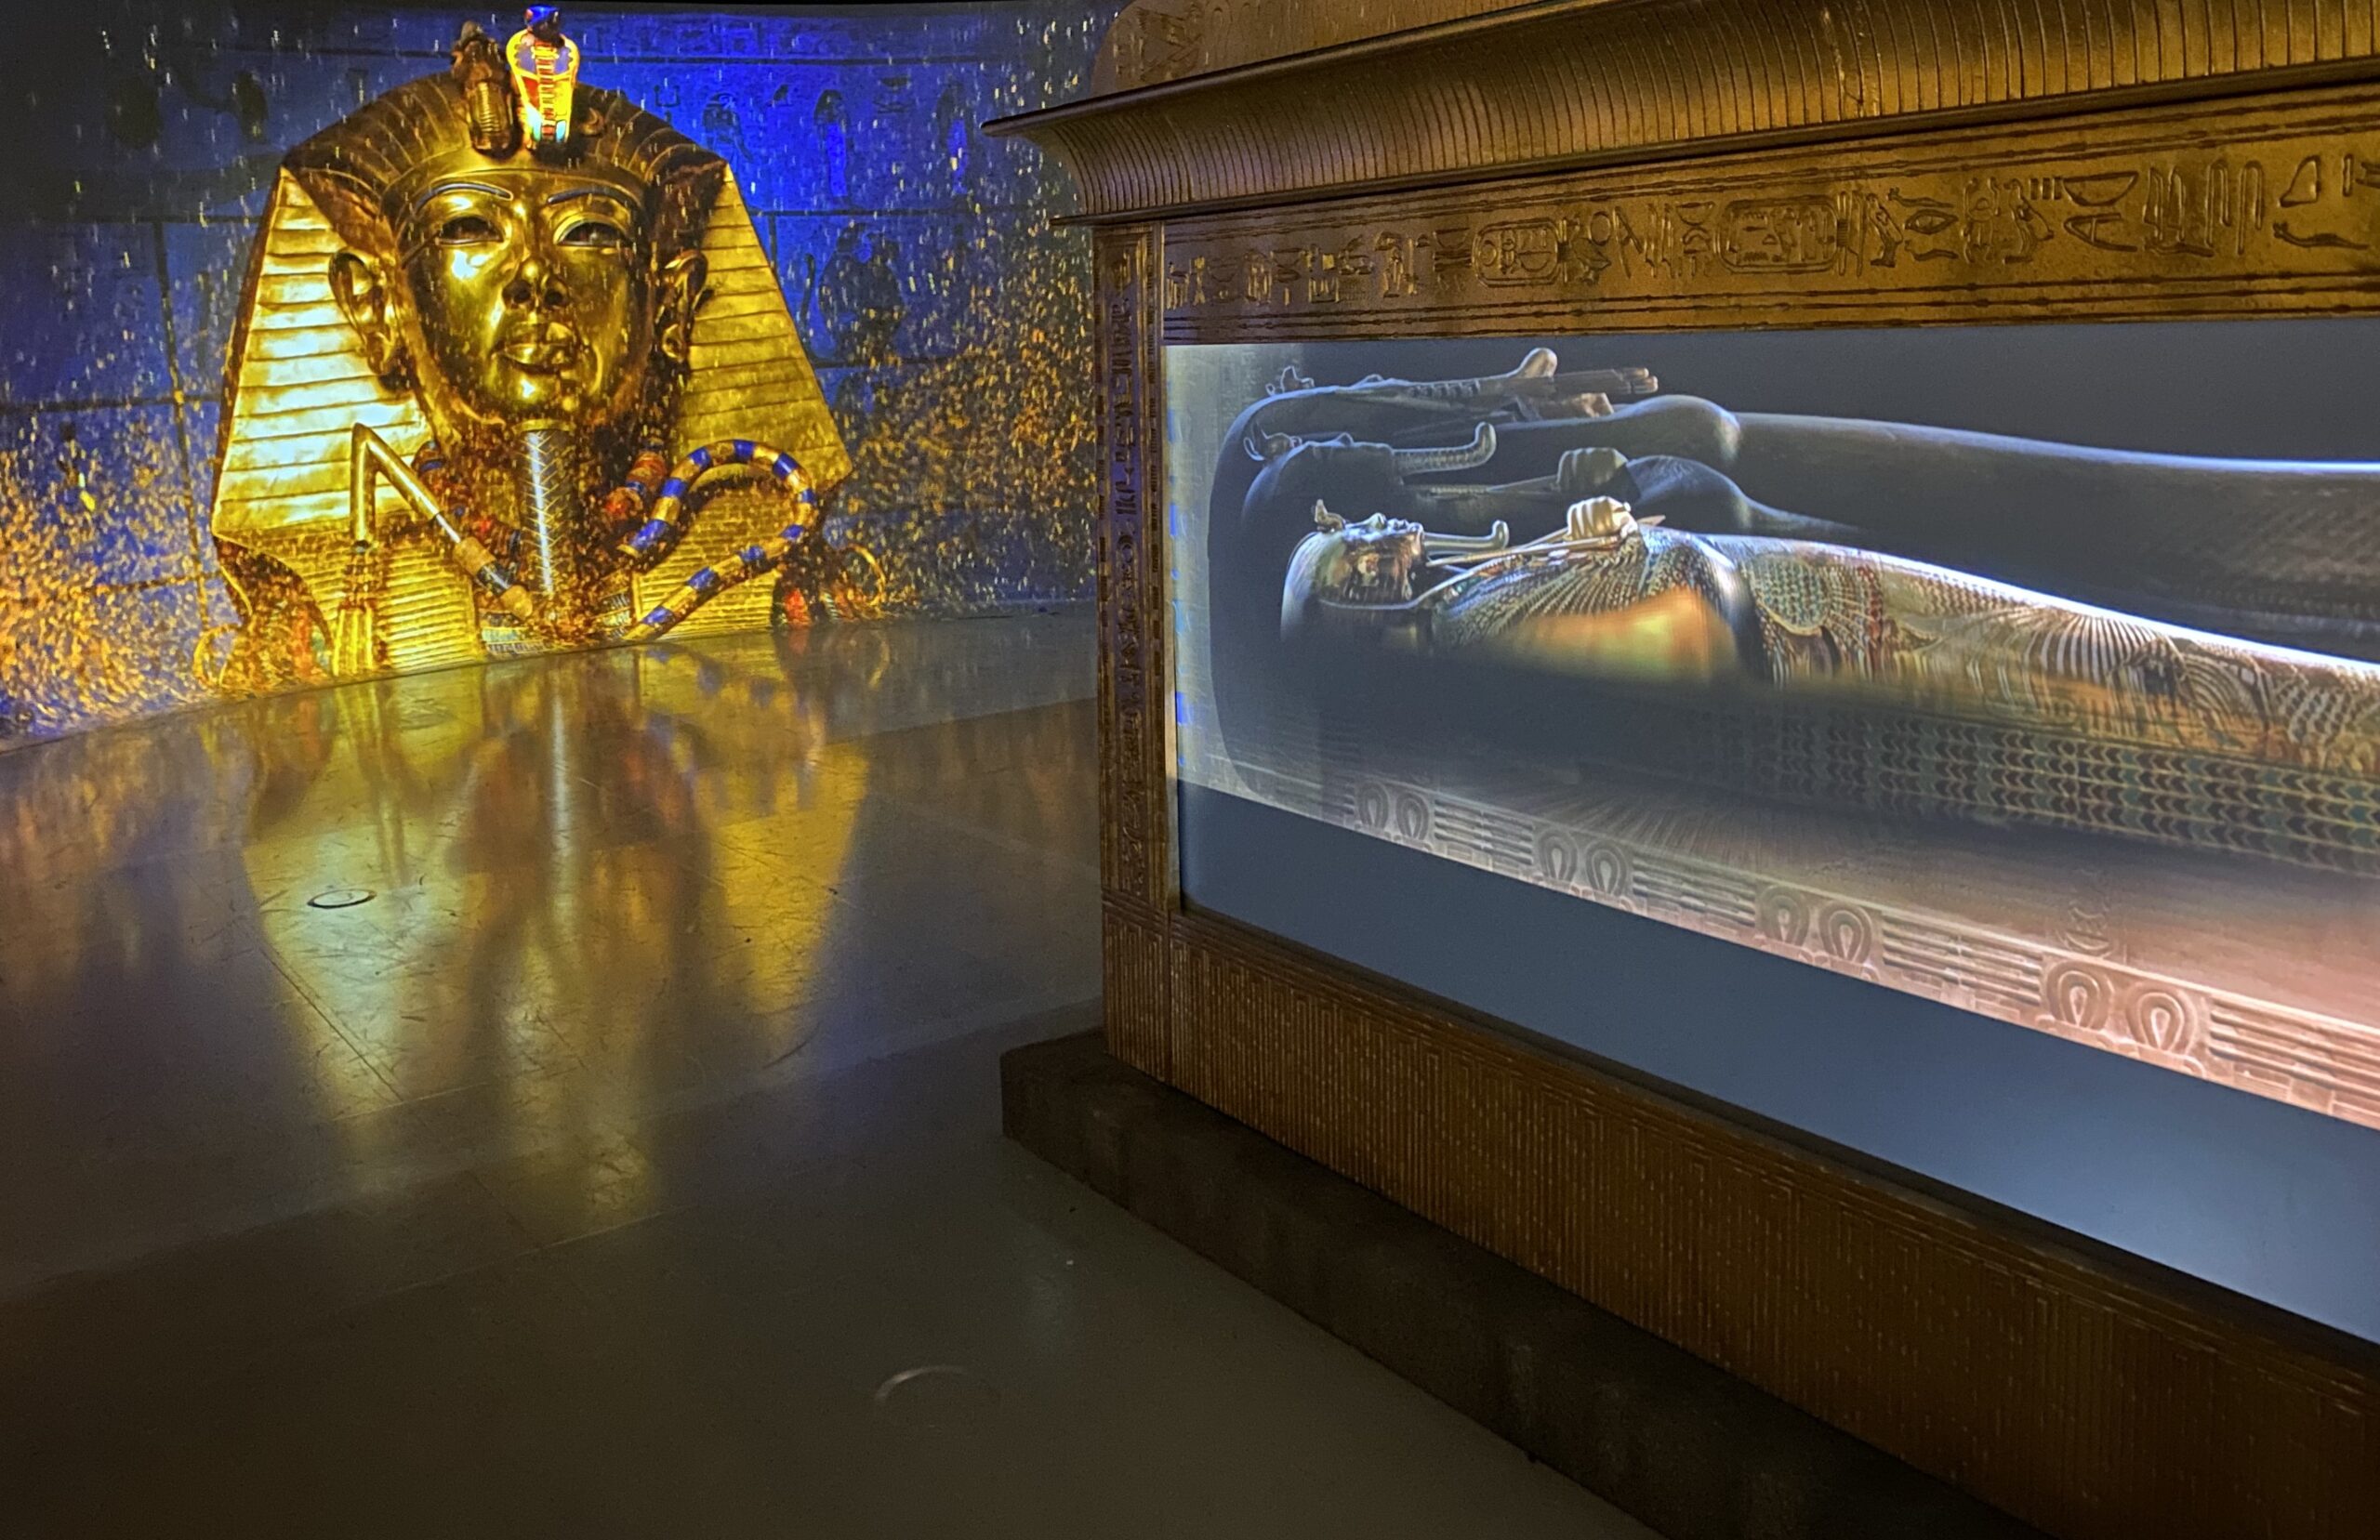 Projected image of King Tut's nested coffins within the inner shrine at Beyond King Tut exhibit